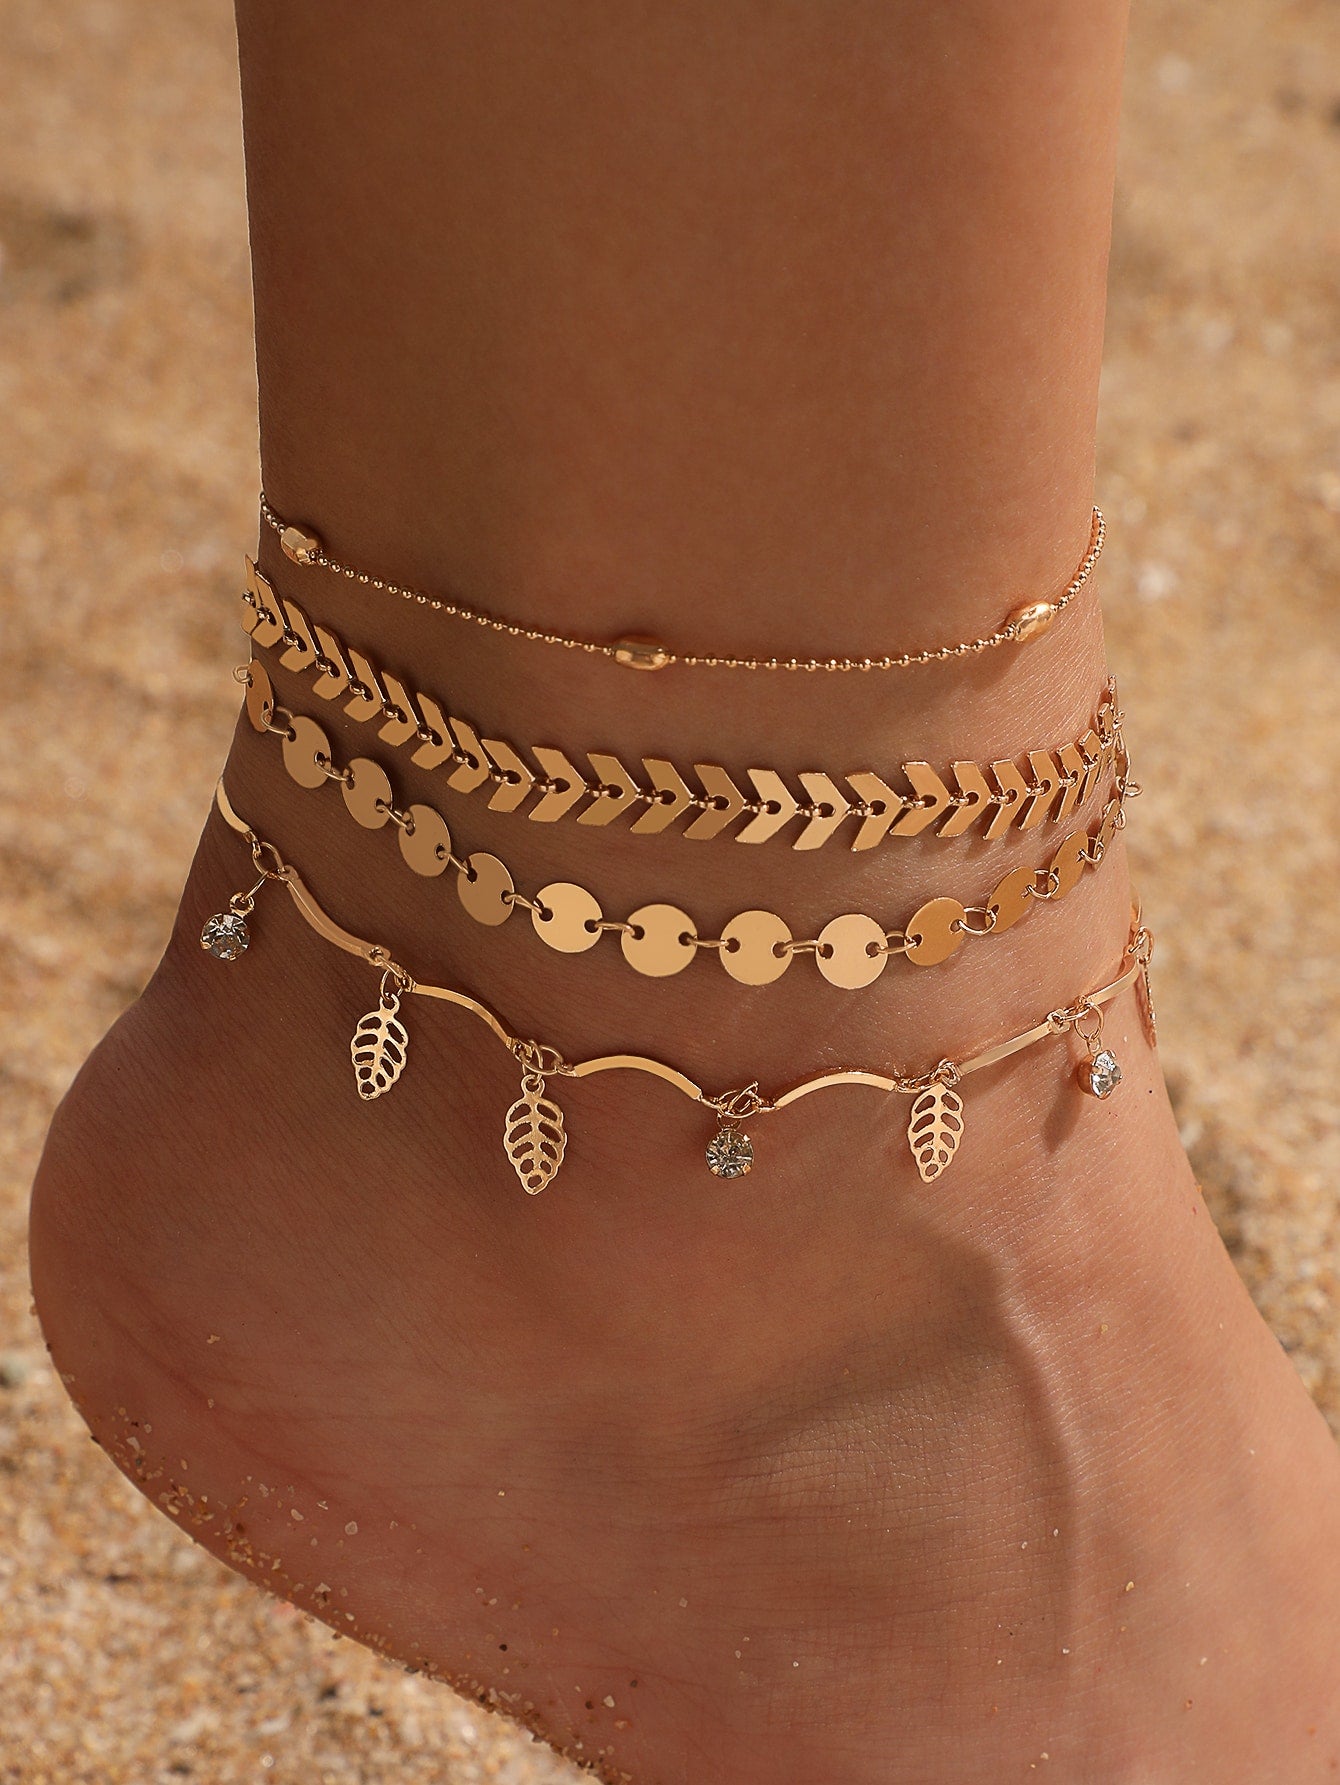 4pcs Hollow Out Leaf Charm Anklet - www.thetreasurebox.me